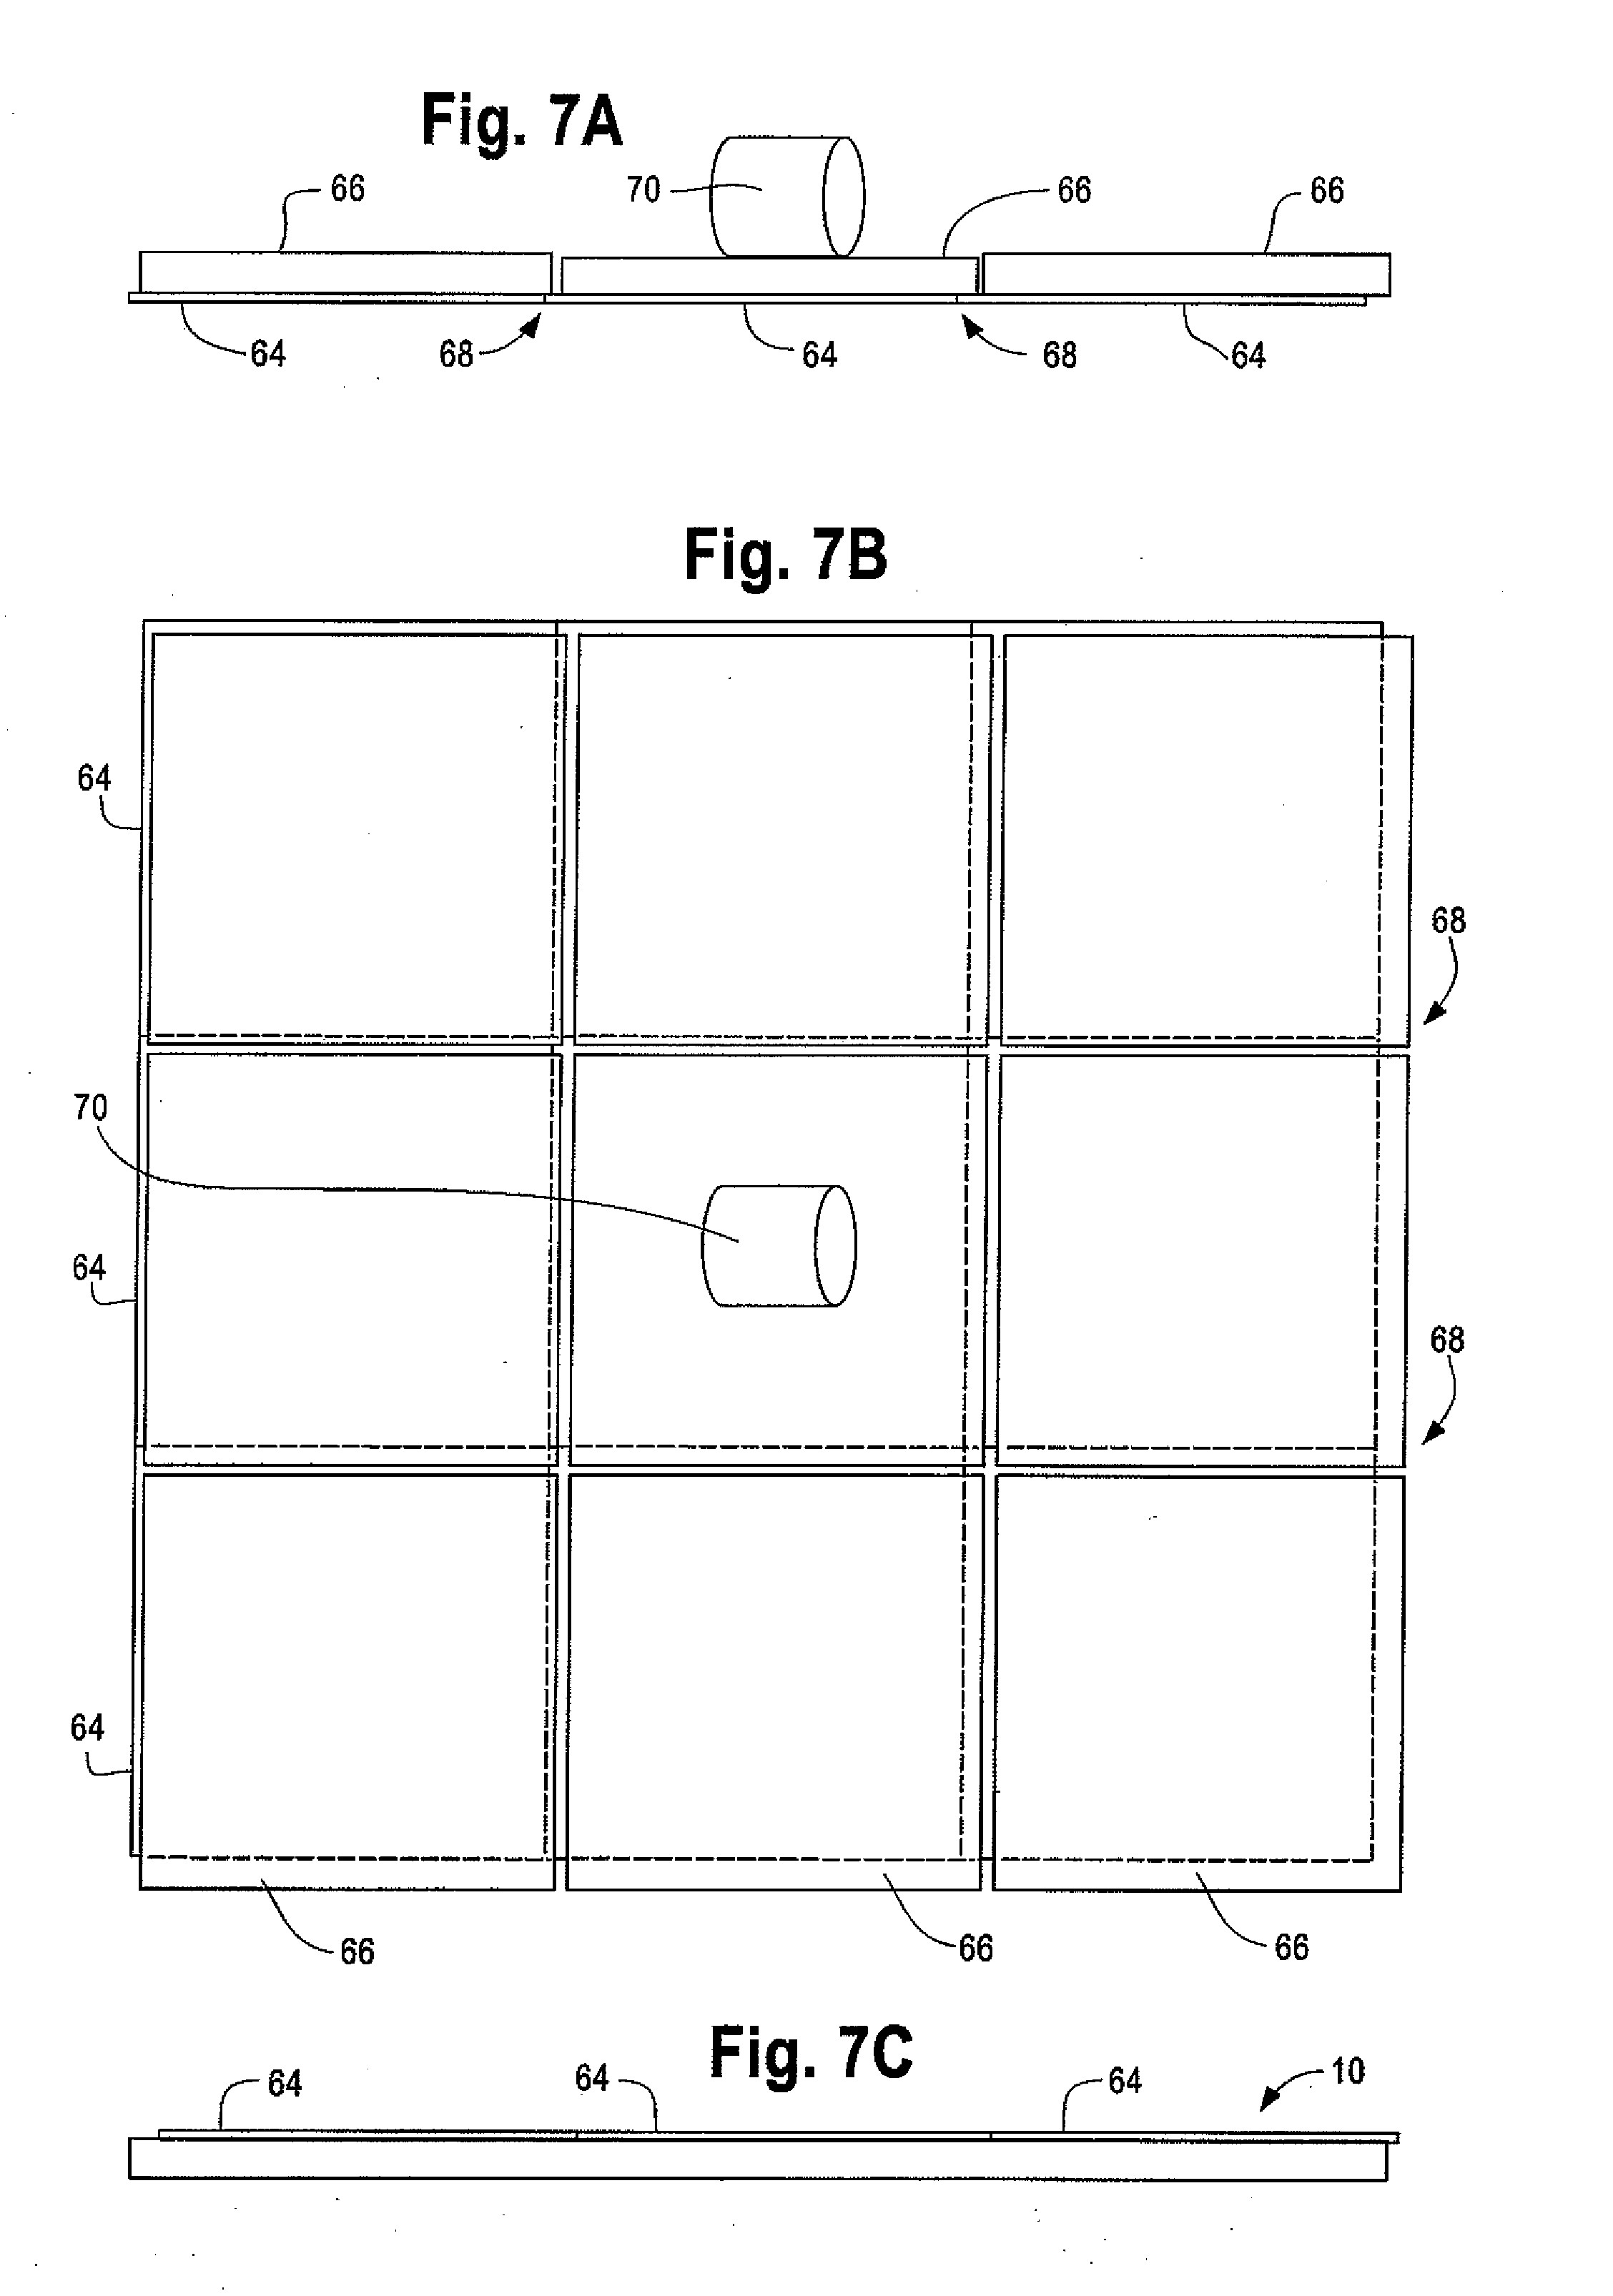 Seed Layers and Process of Manufacturing Seed Layers